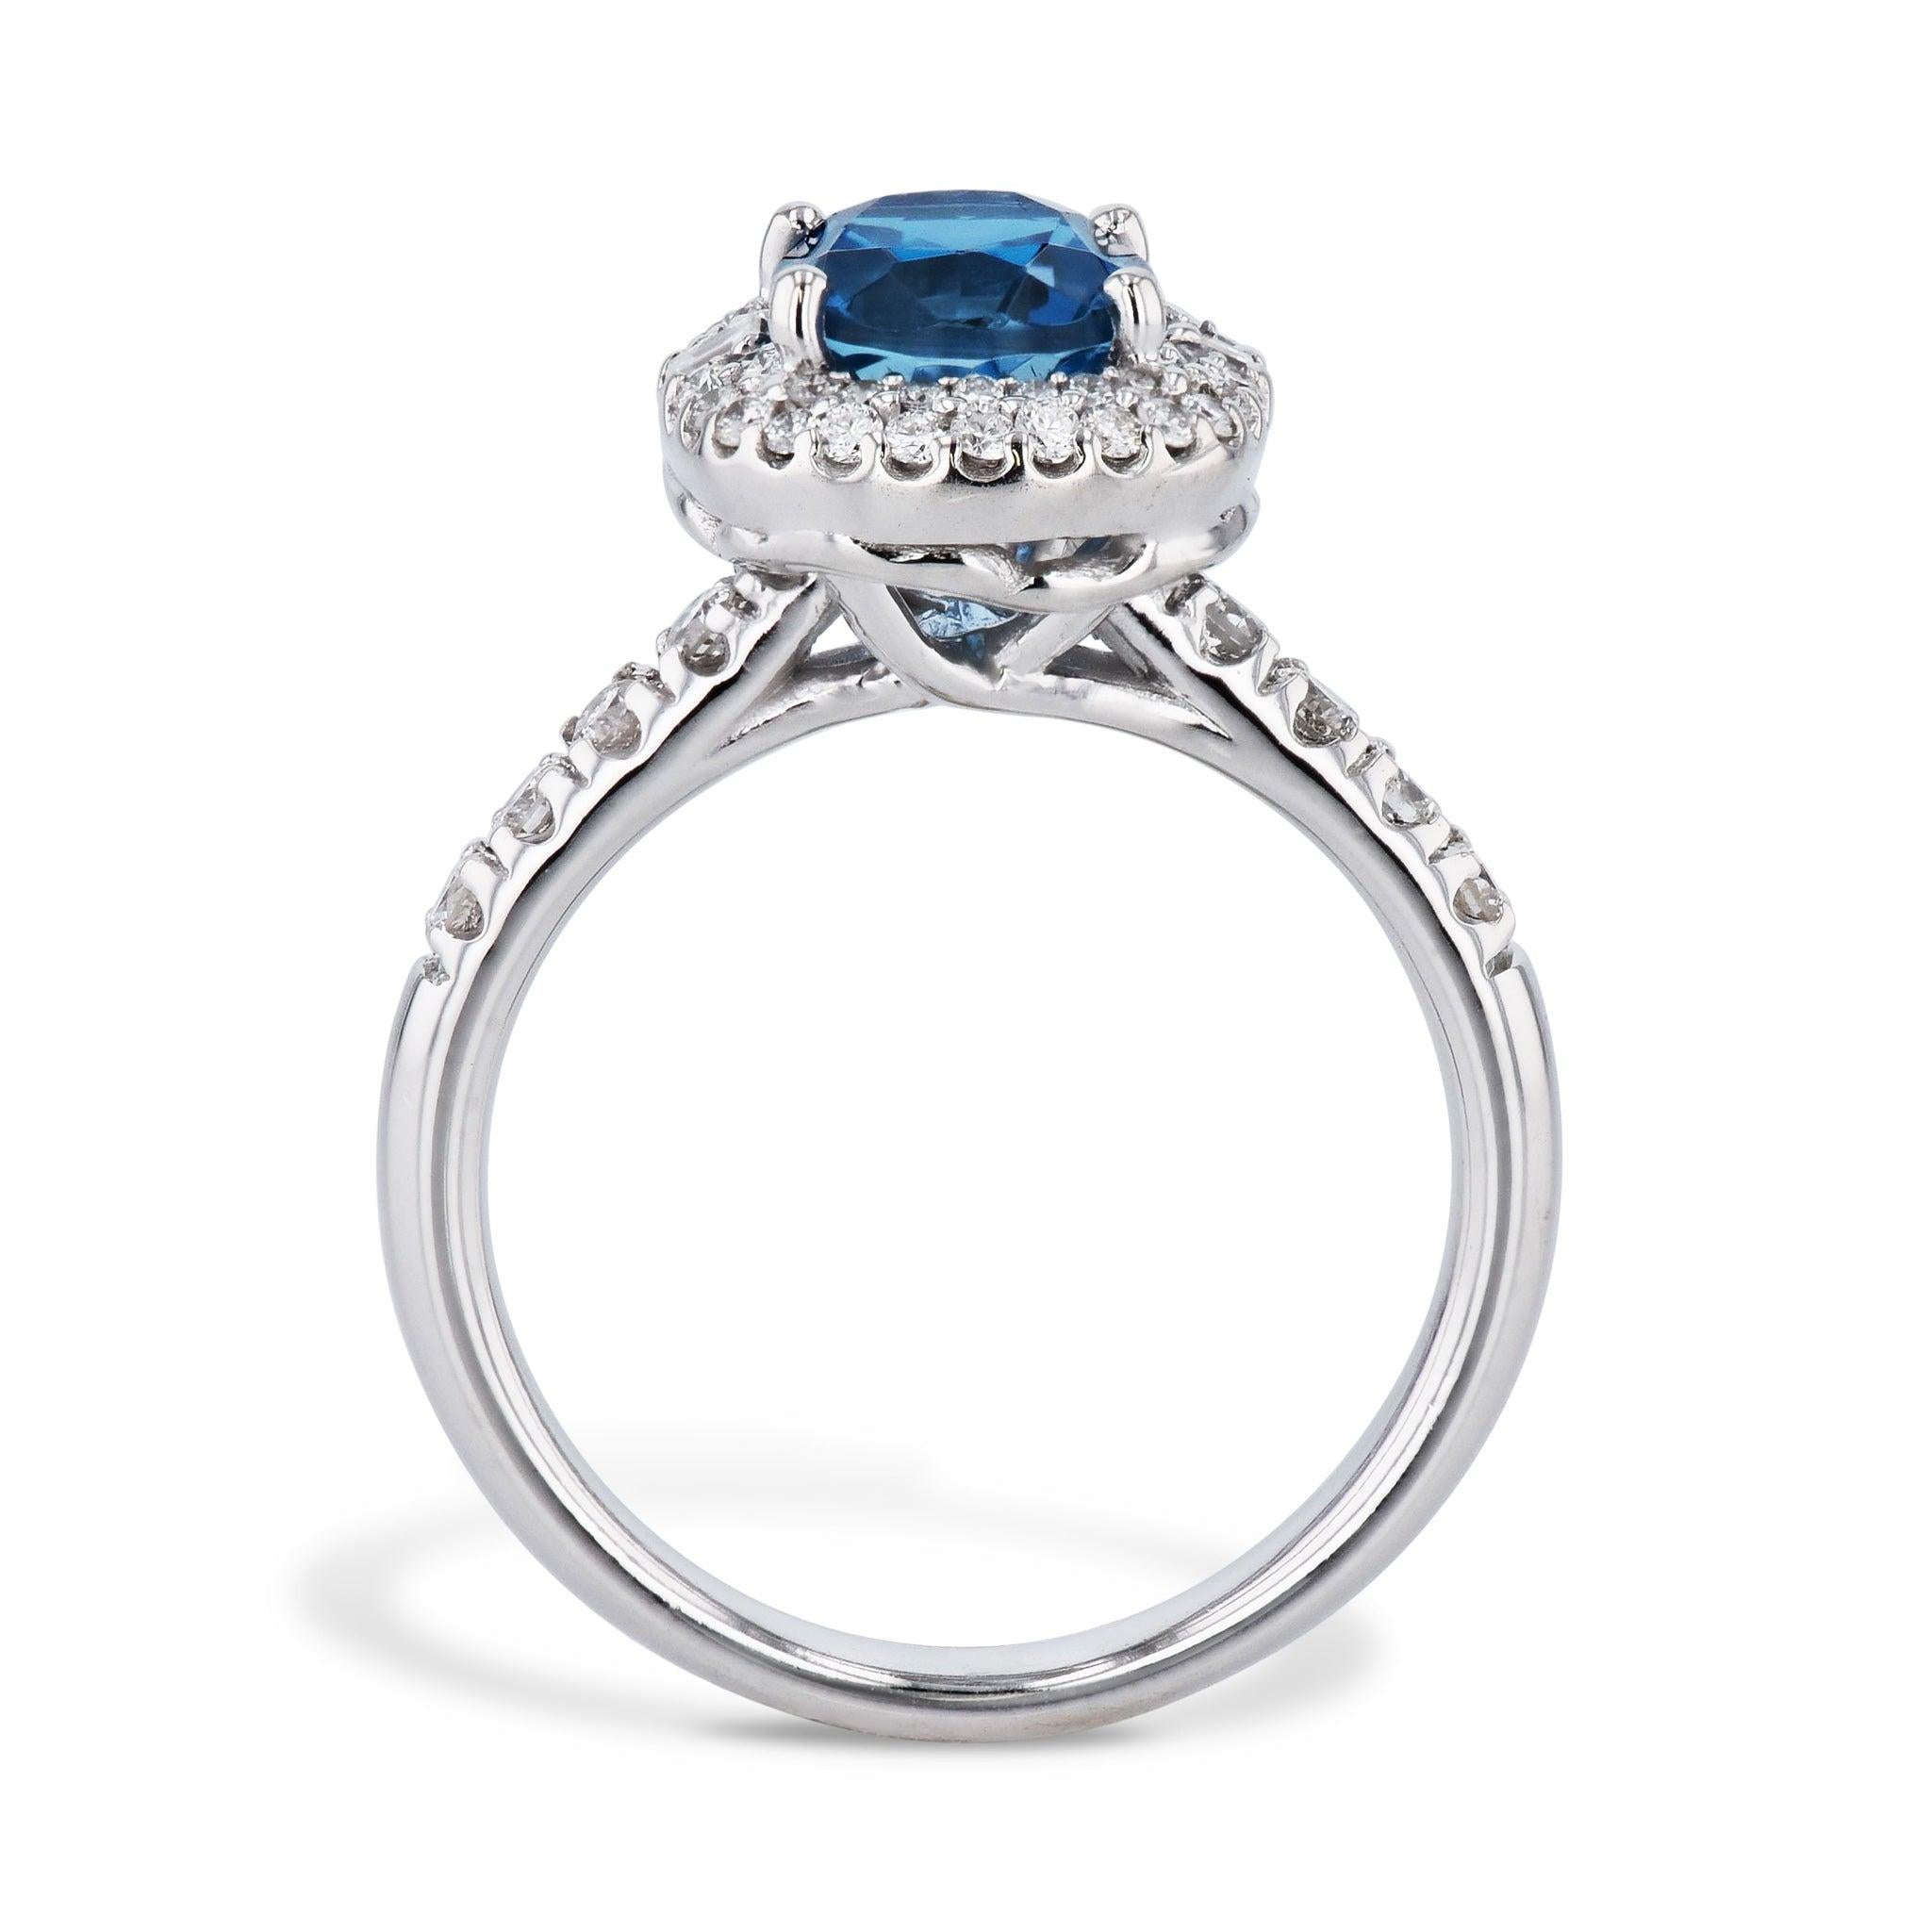 Elevate your look with the stunning London Blue Topaz and Diamond Estate Ring. This classic piece is crafted of lustrous 14kt. White Gold, and showcases a vibrant London Blue Topaz at the center. An exquisite display of Diamonds set around the topaz